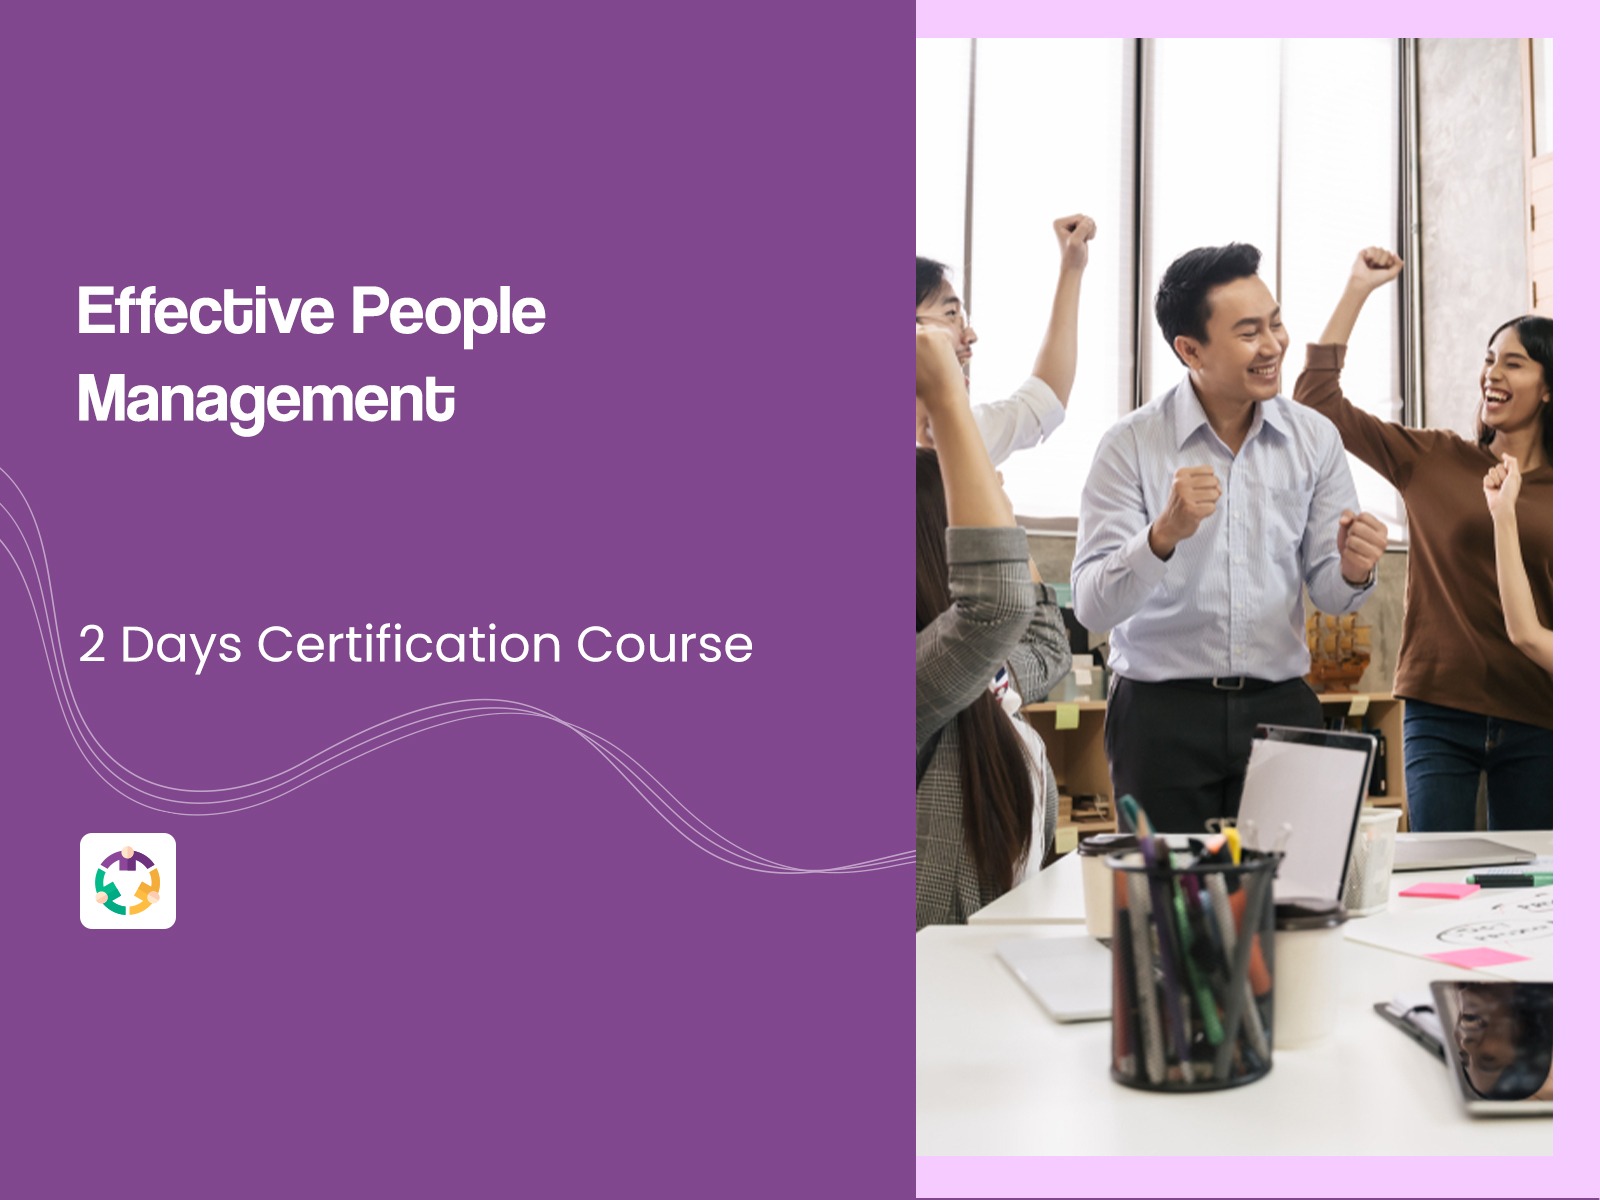 Effective People Management skills course in Singapore